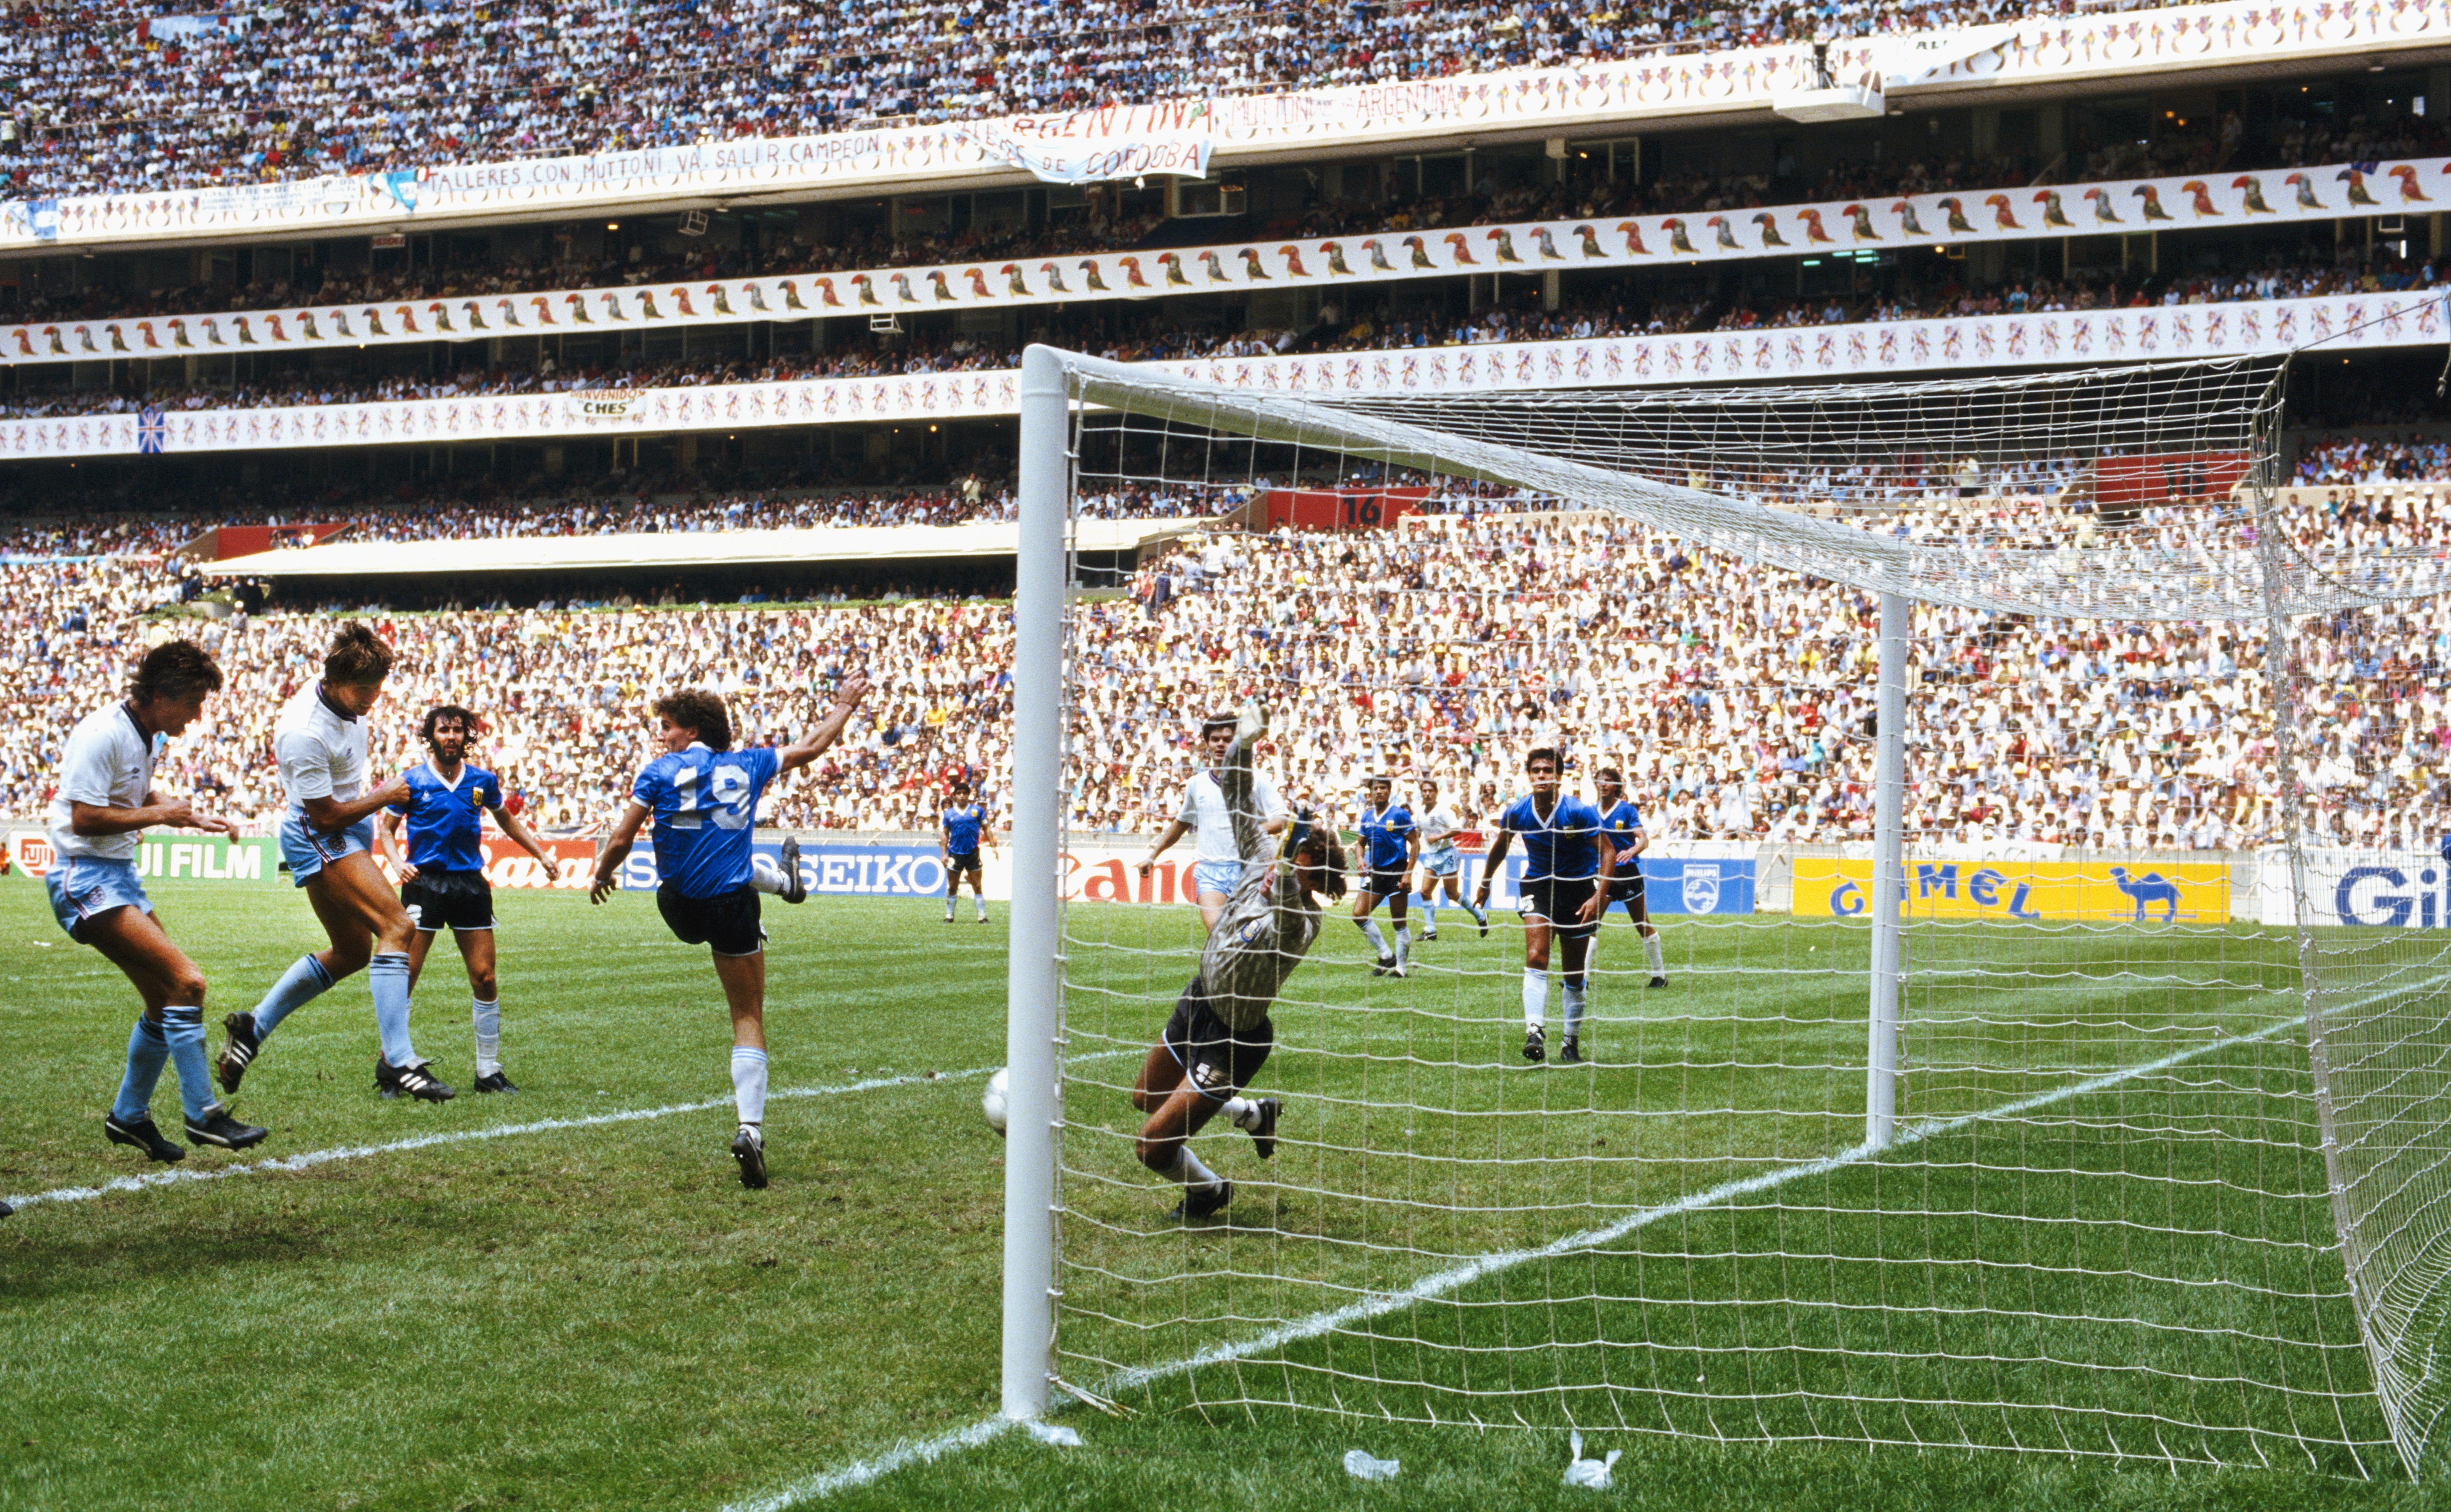 Gary Lineker heads in a goal for England against Argentina in 1986